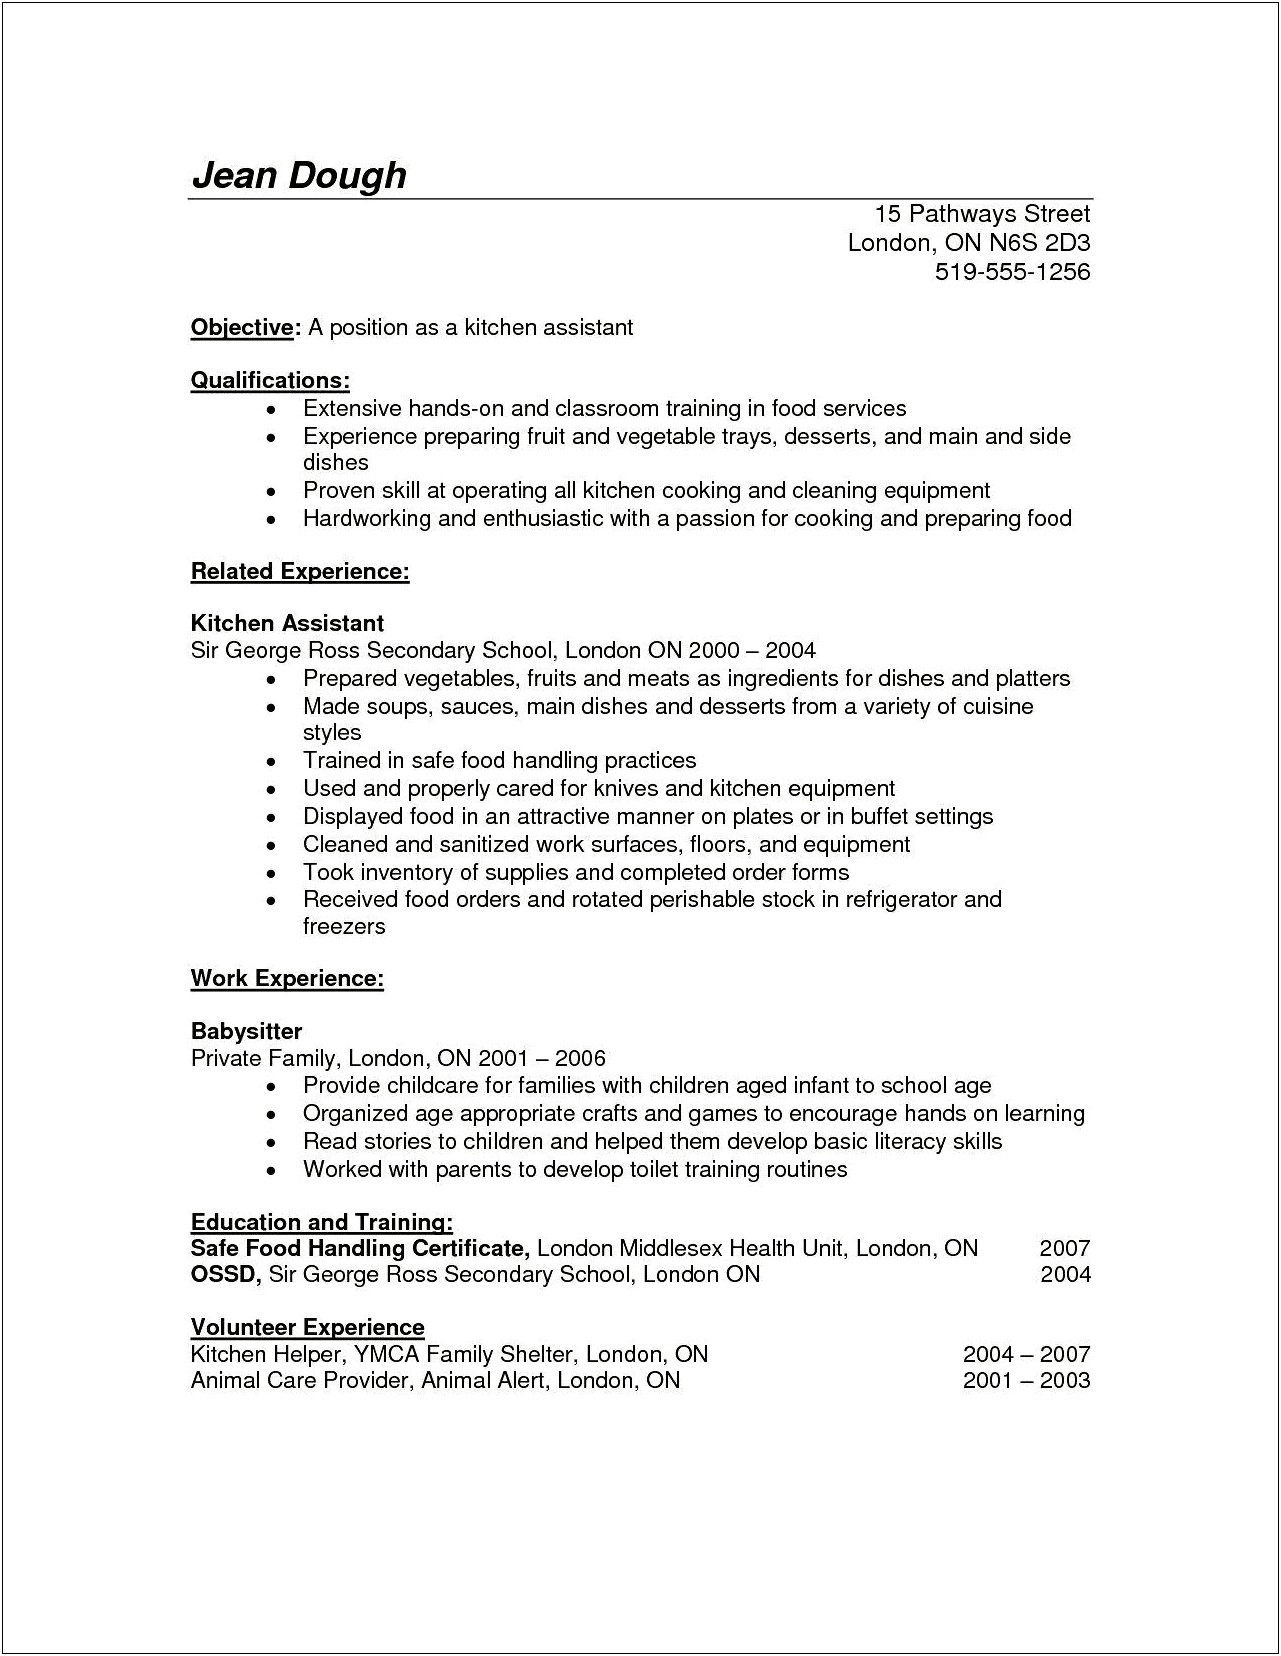 Resume And Cover Letter For Kitchen Assistant